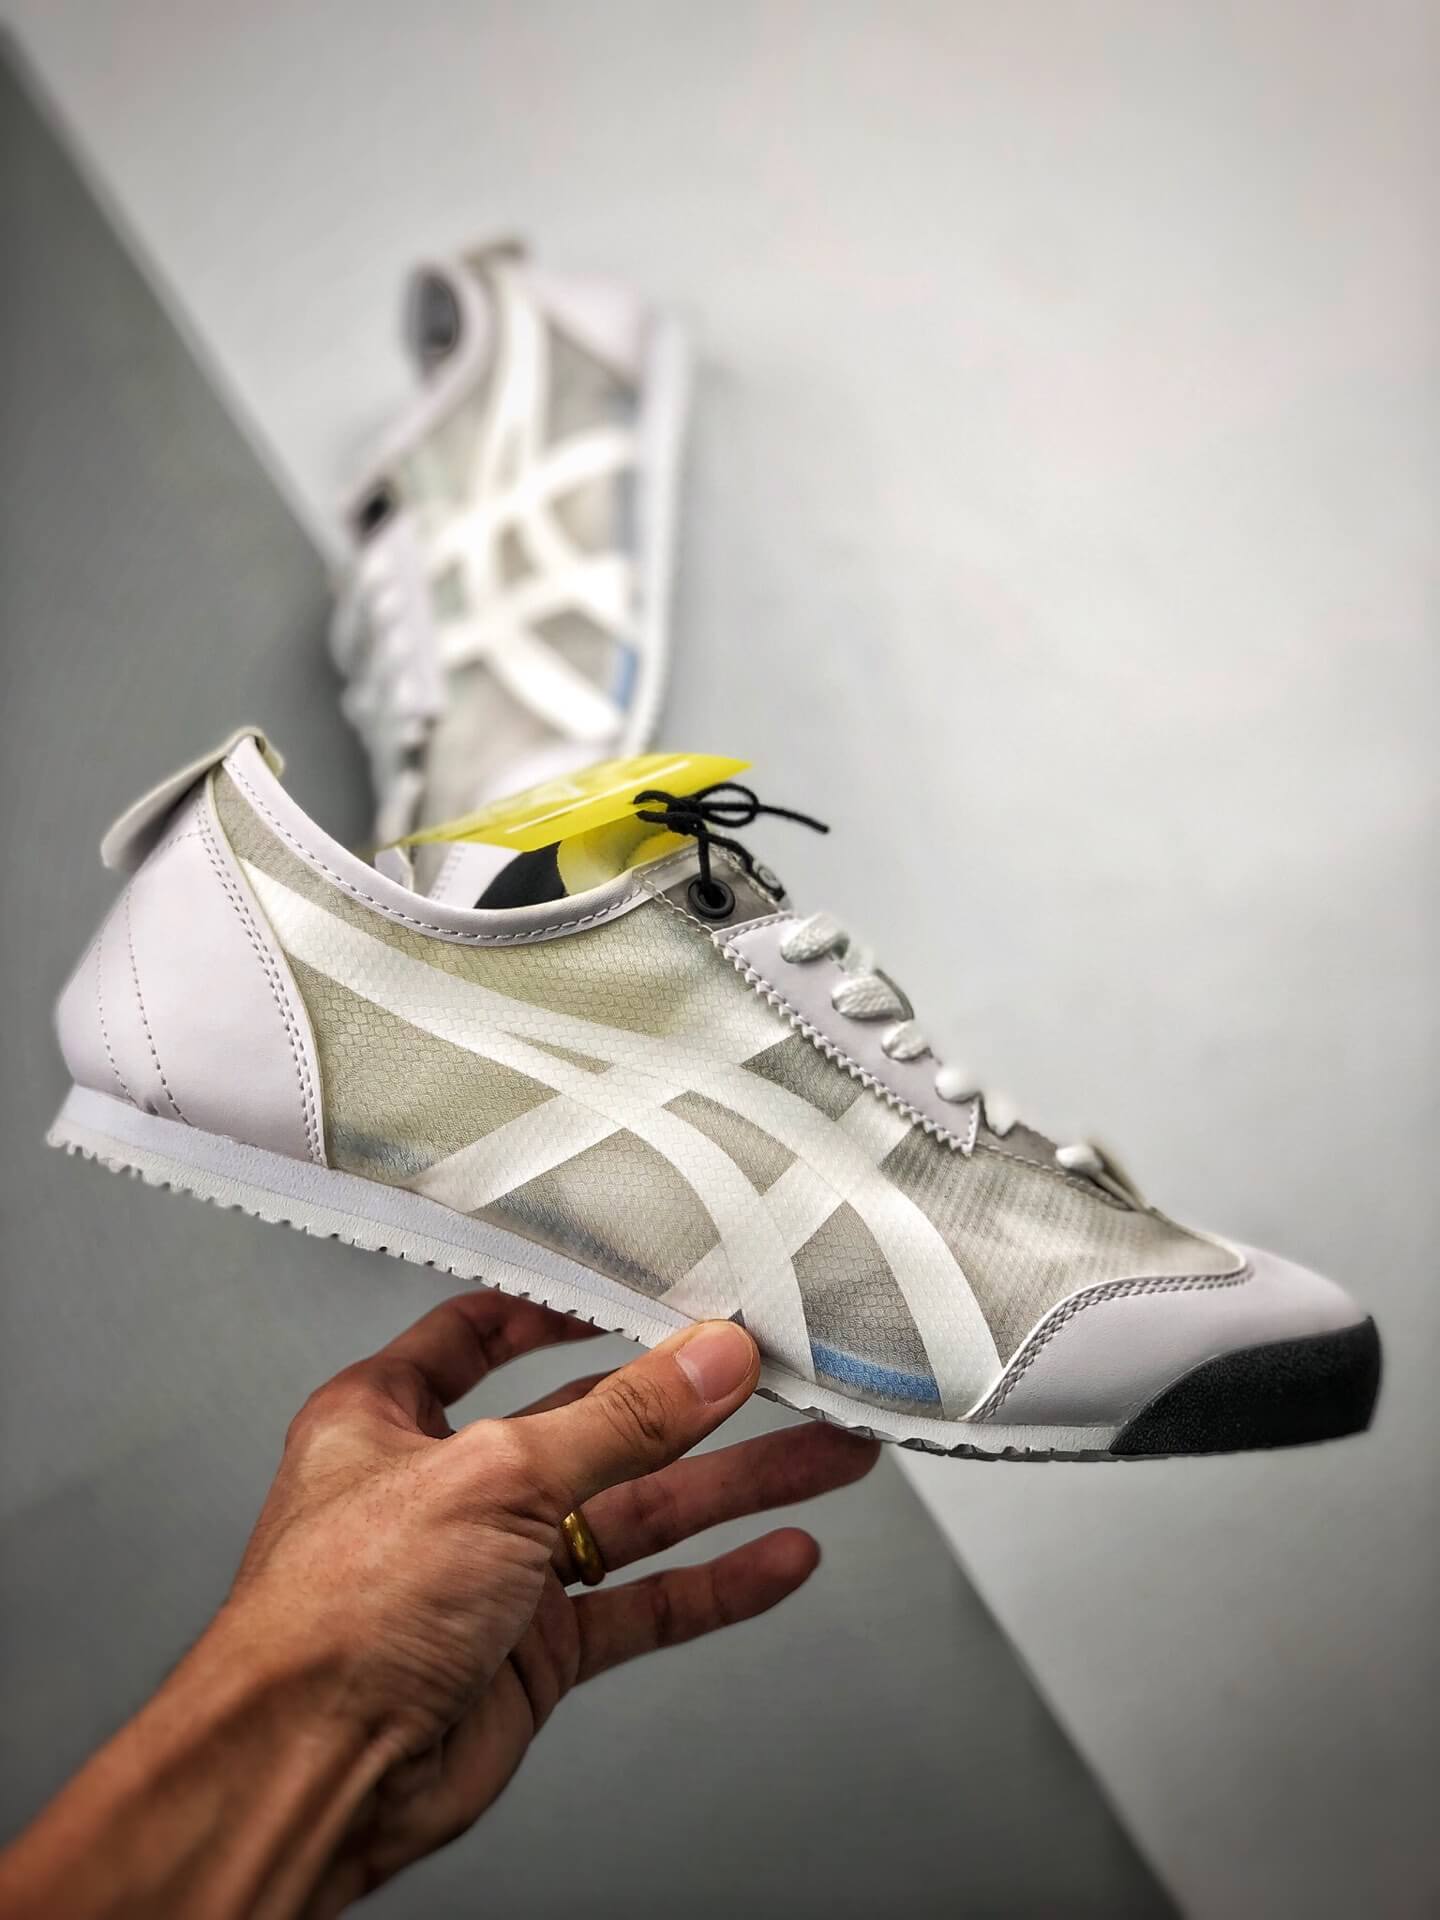 The Onitsuka Tiger x Andrea Pompilio 